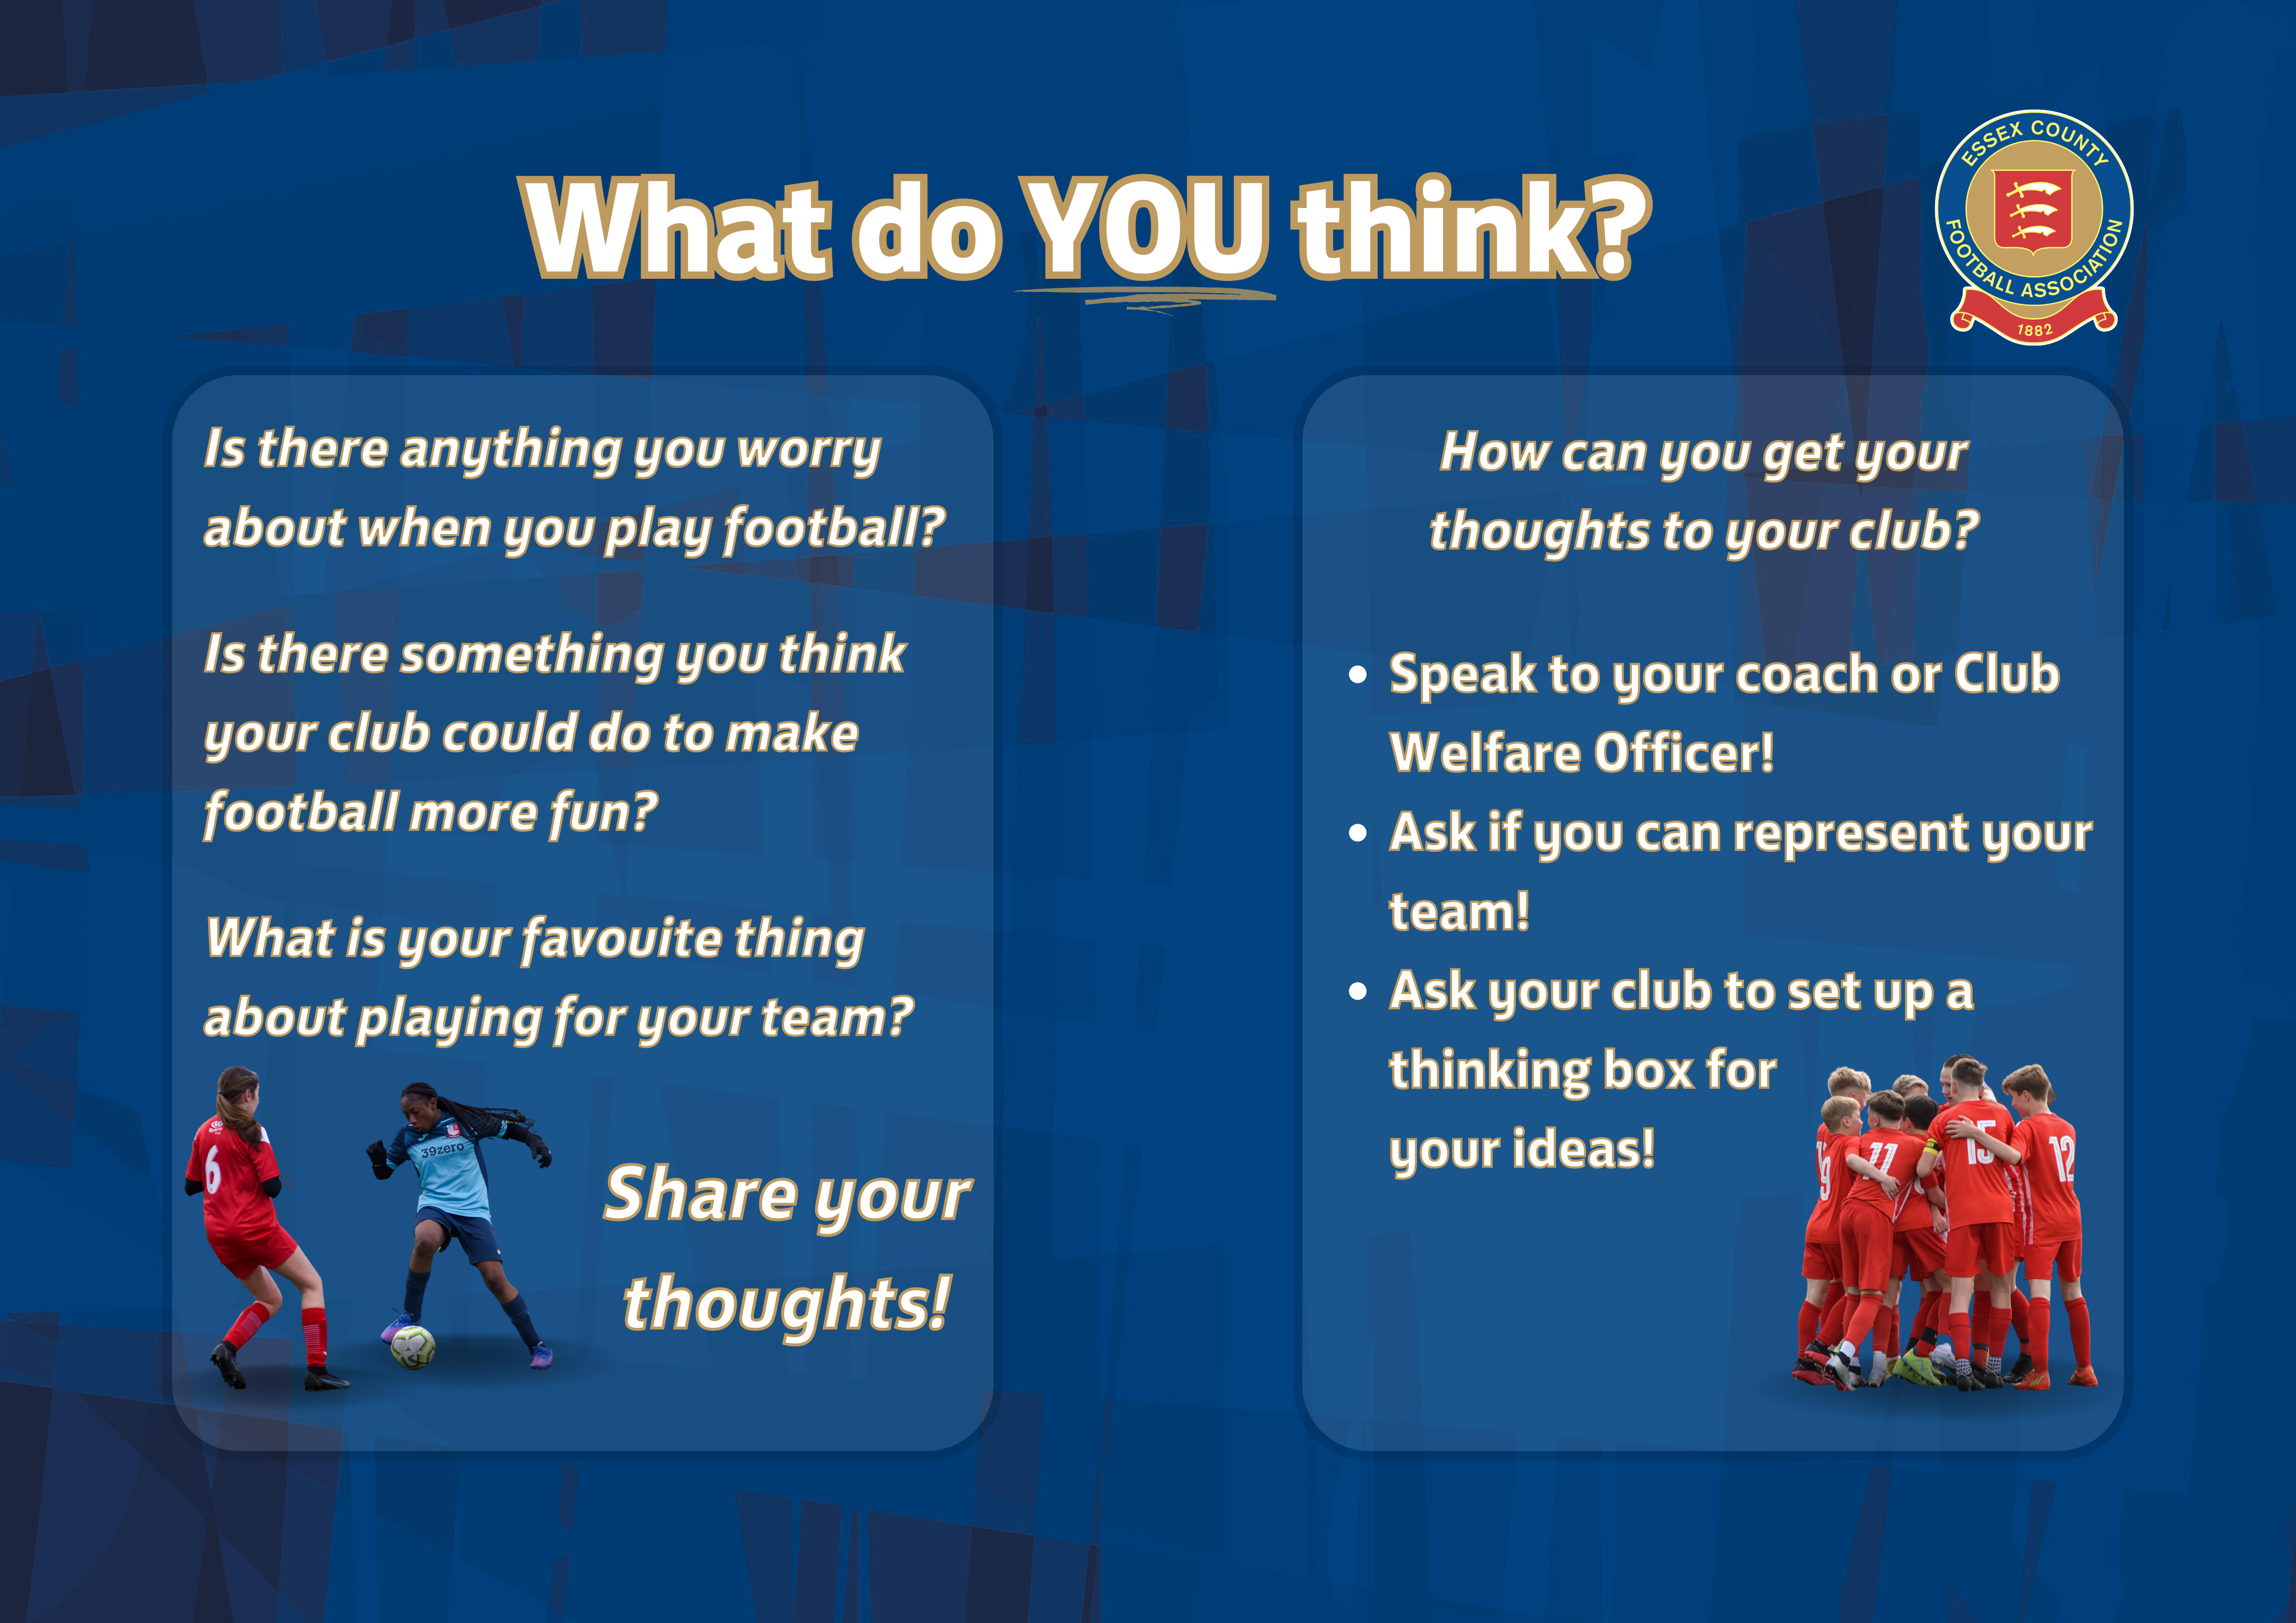 Poster asking youth players for their thoughts on their club